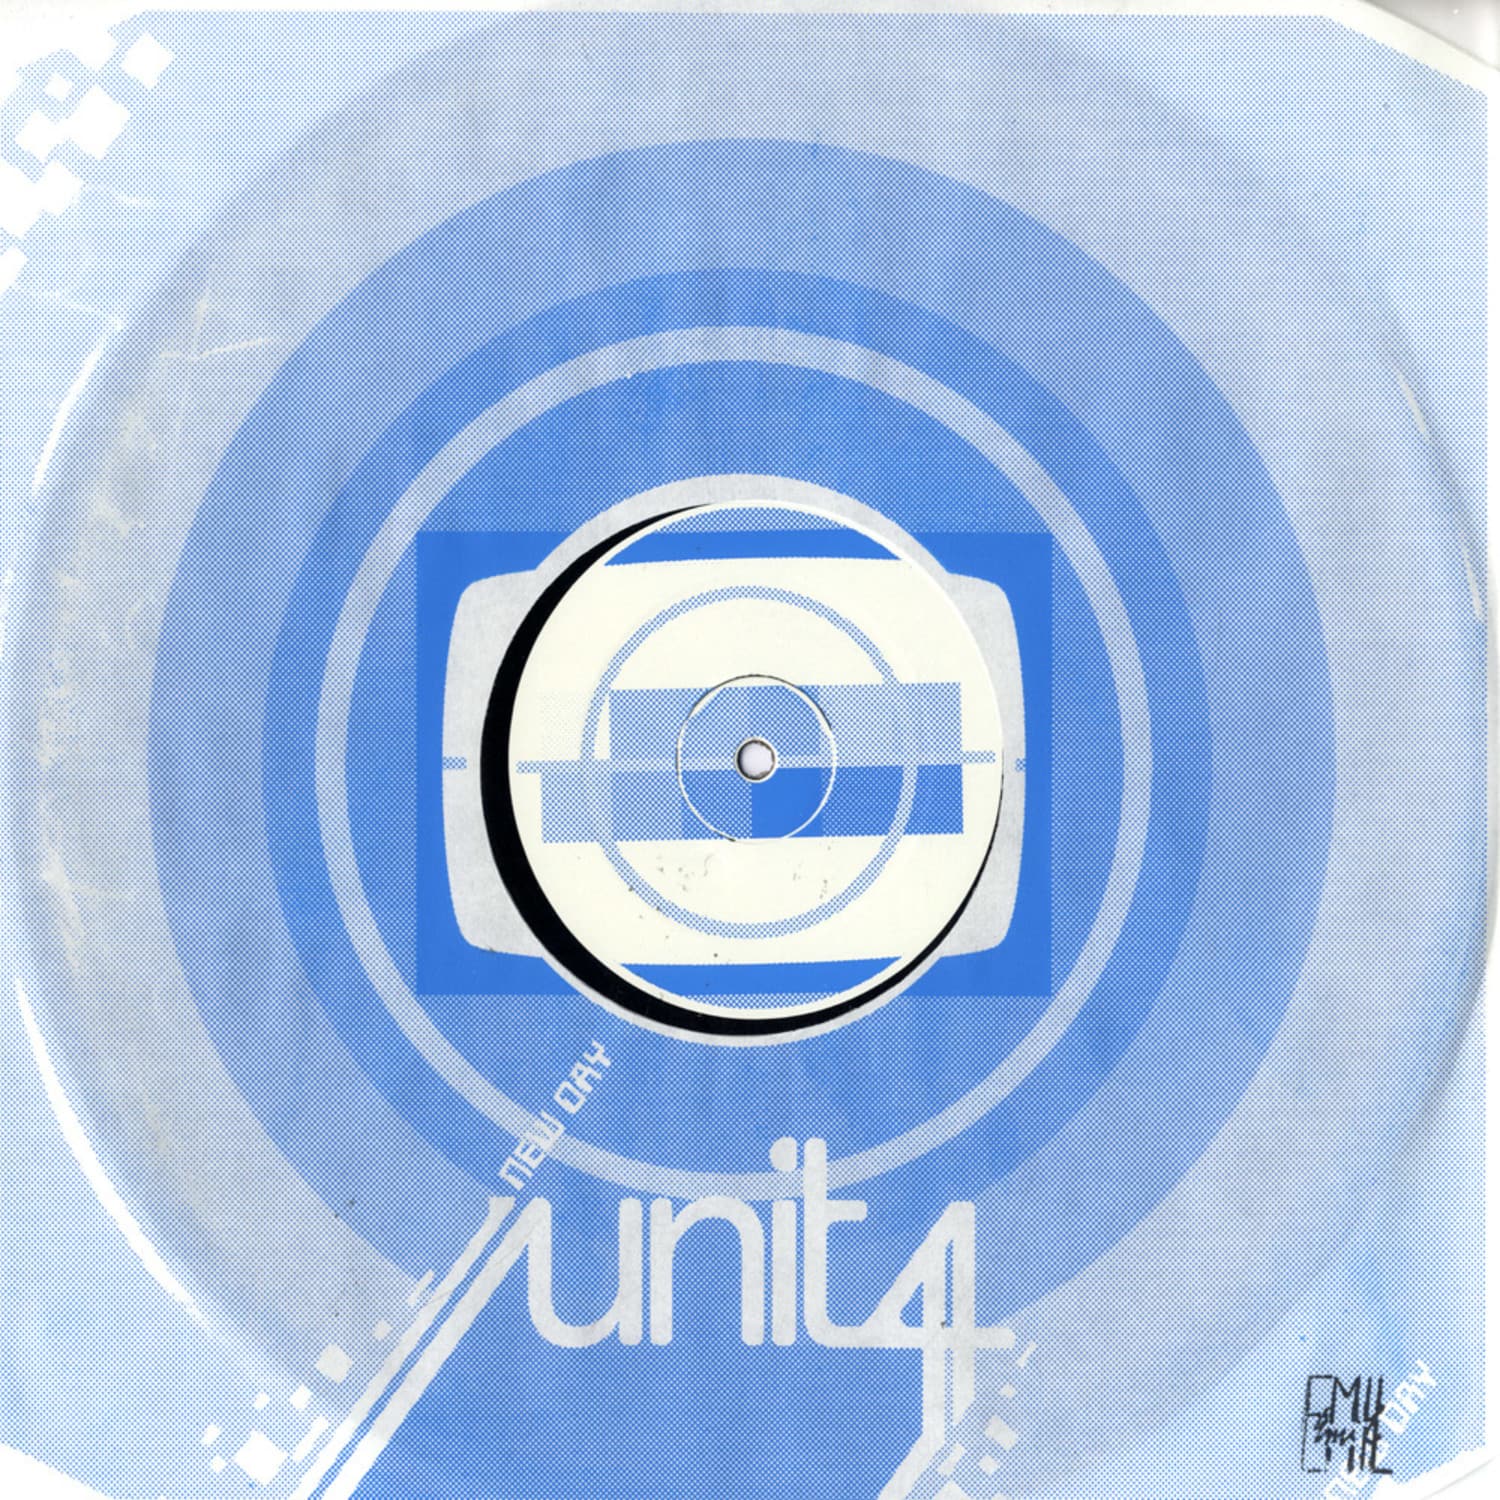 Unit 4 - NEW DAY